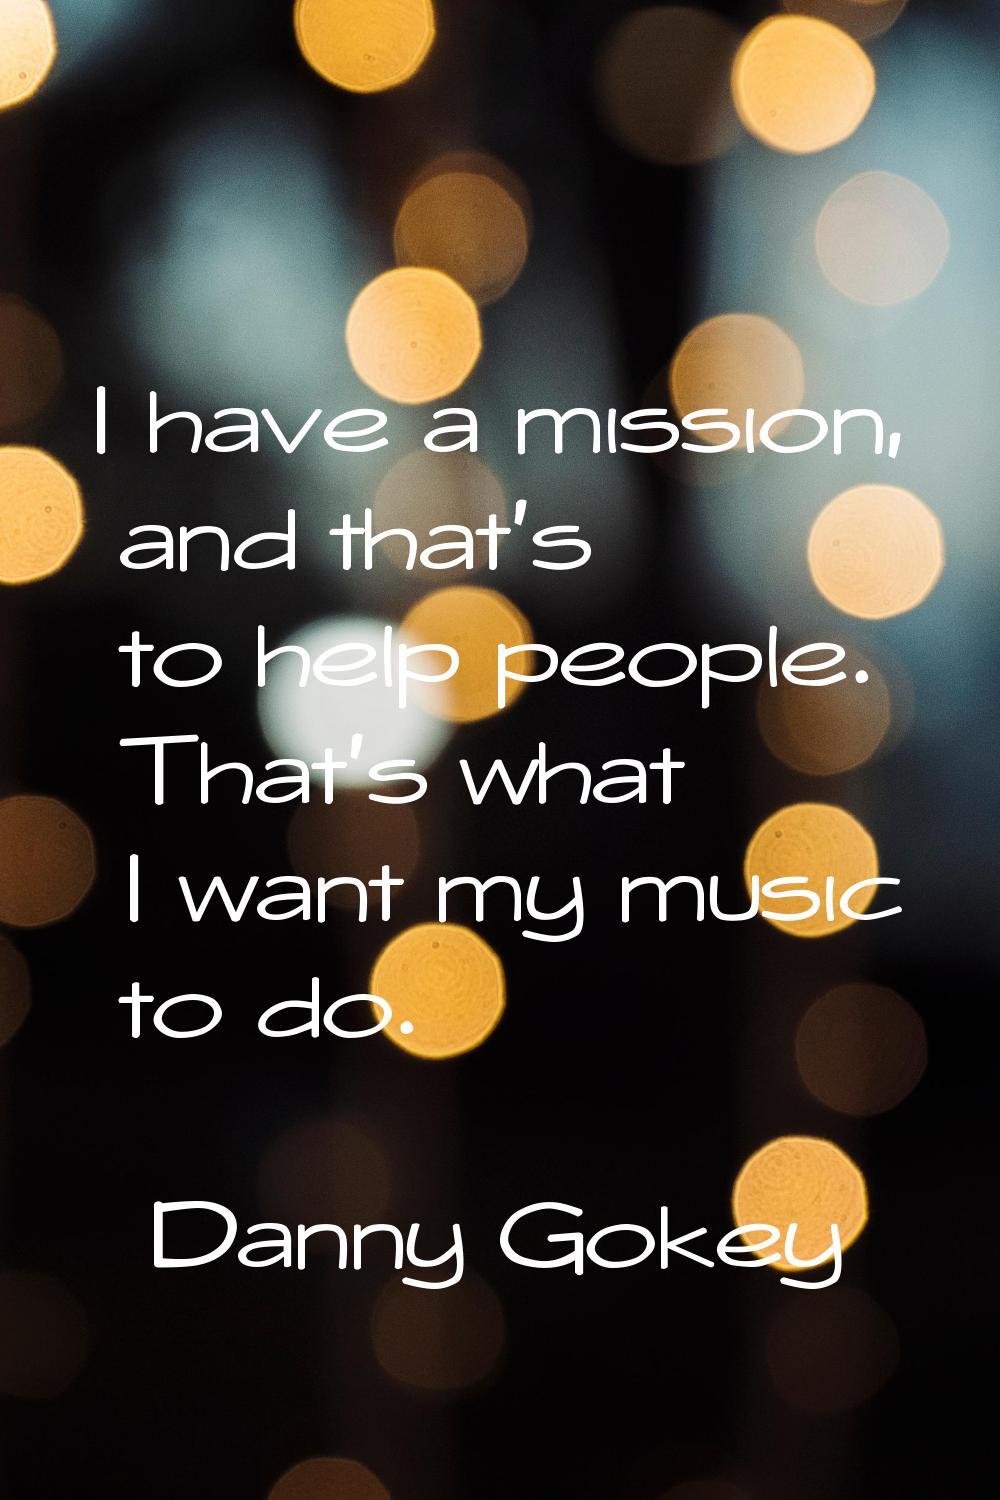 I have a mission, and that's to help people. That's what I want my music to do.